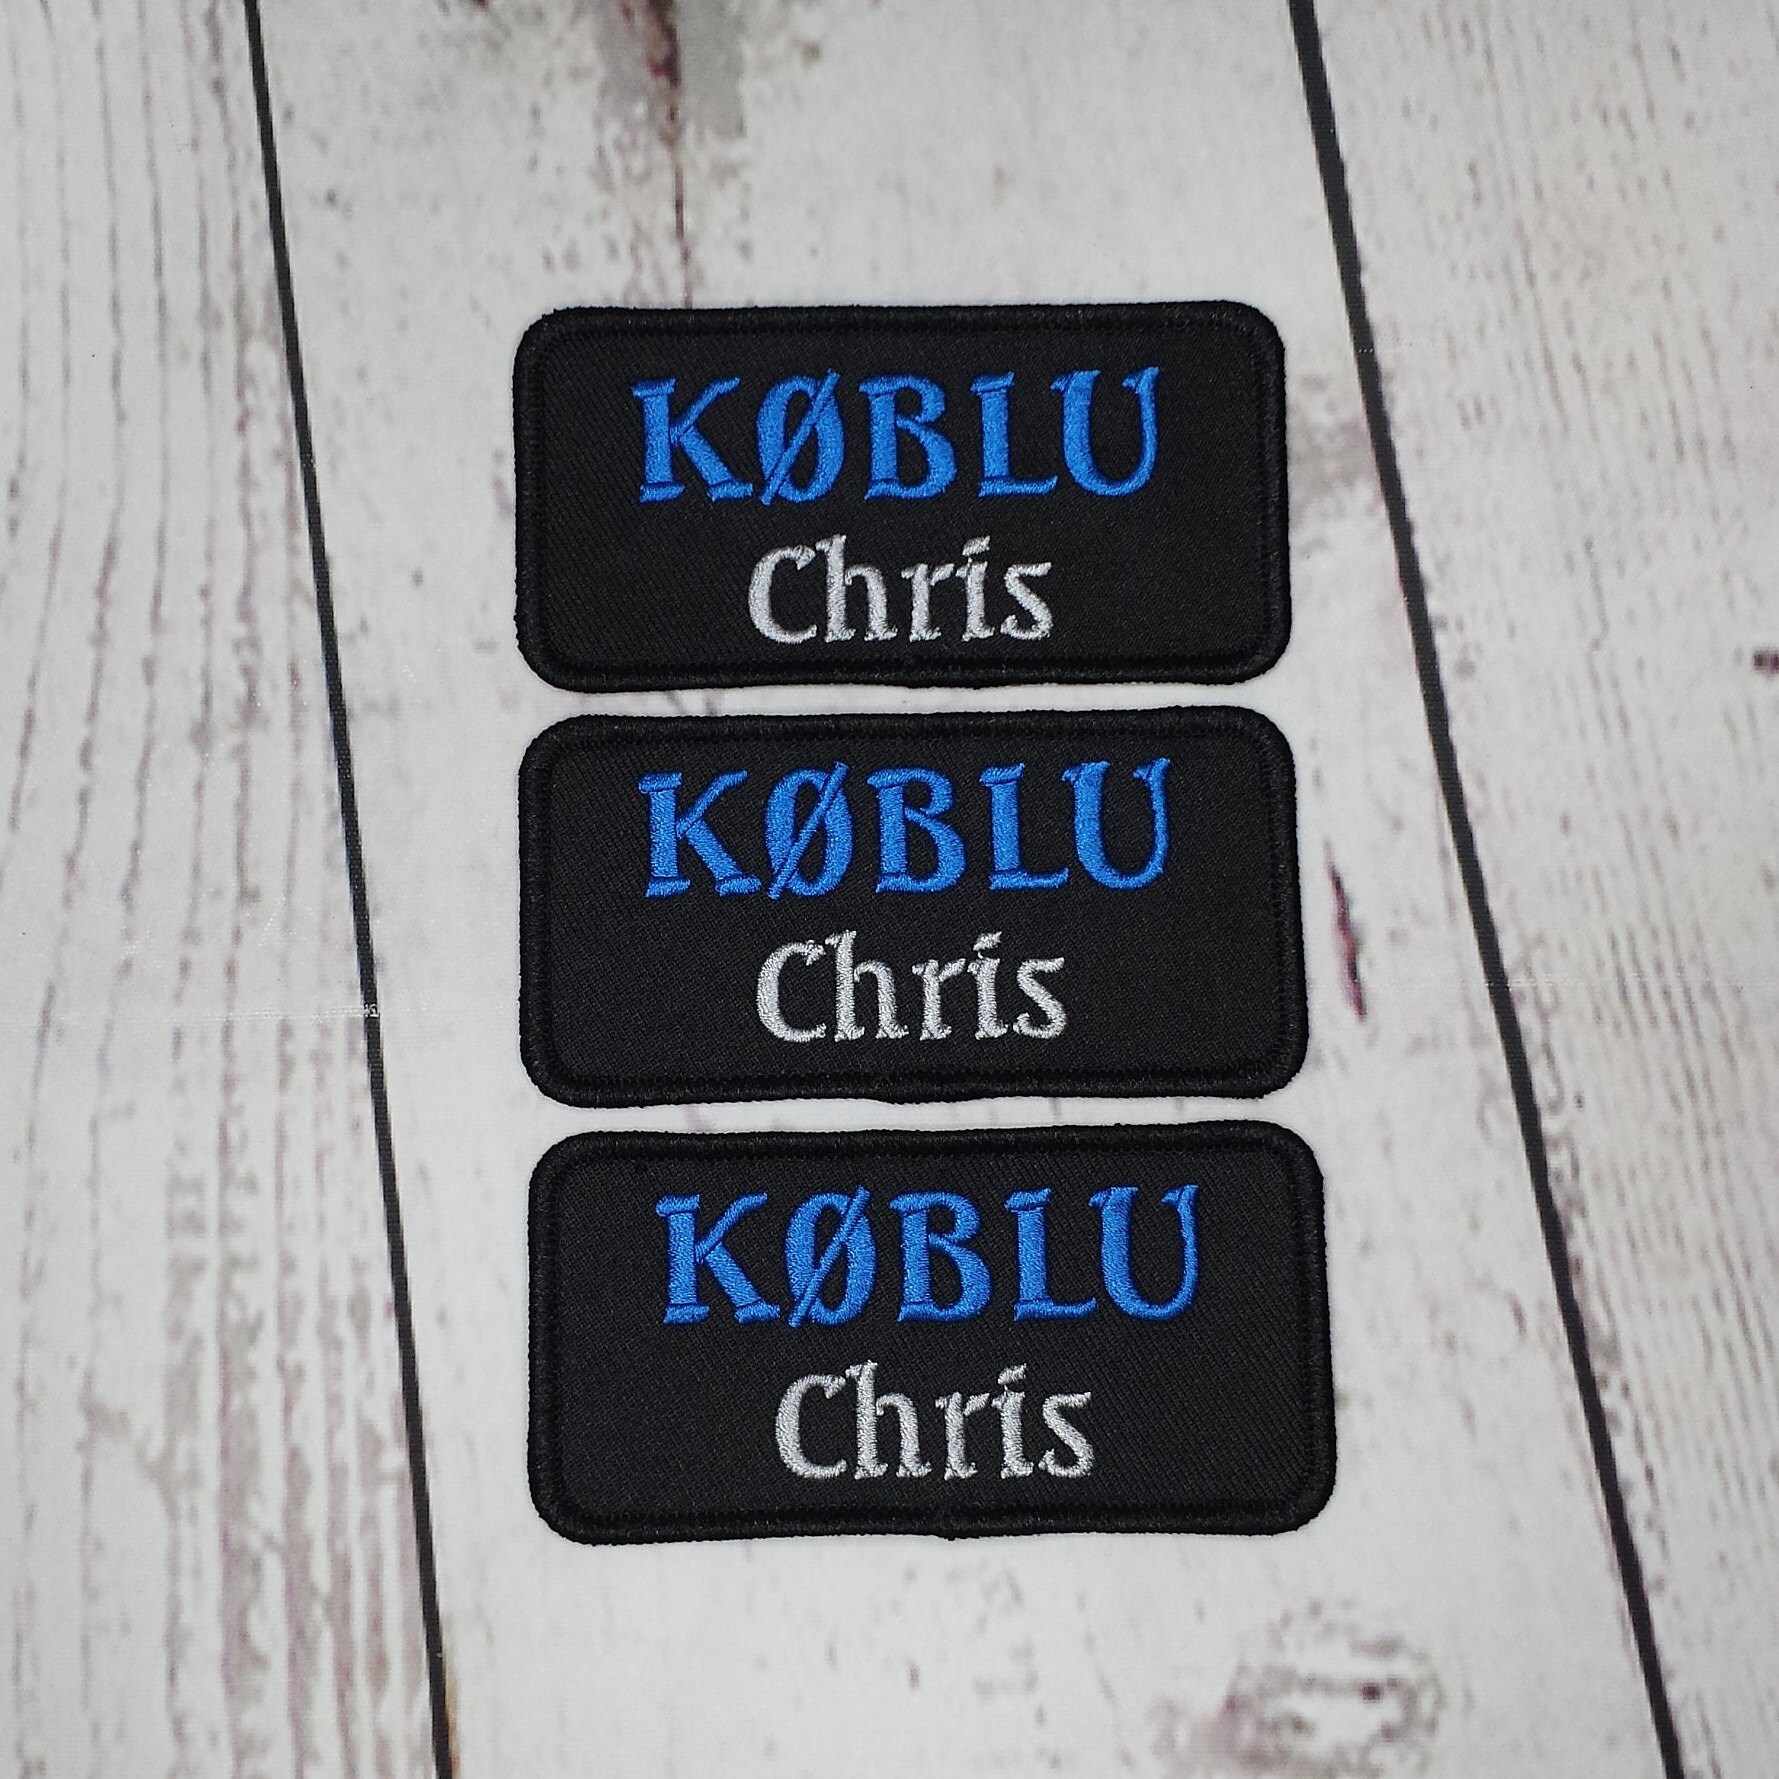 3 Embroidered Amateur Radio Call Sign and Name Patches /